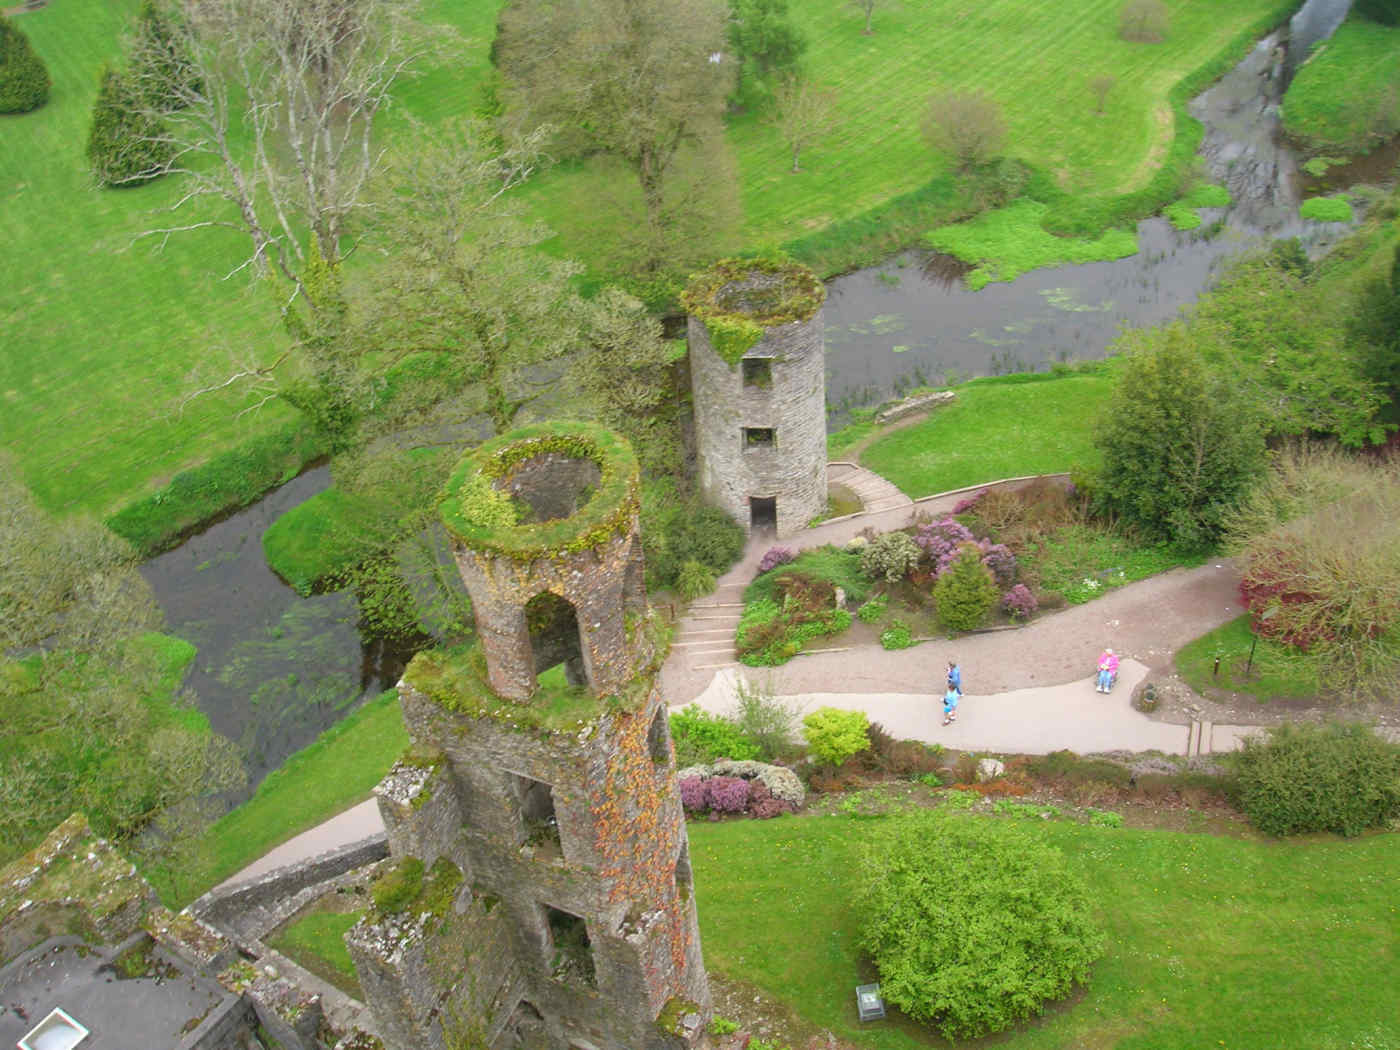 View from the top of Blarney Castle in County Cork, Ireland